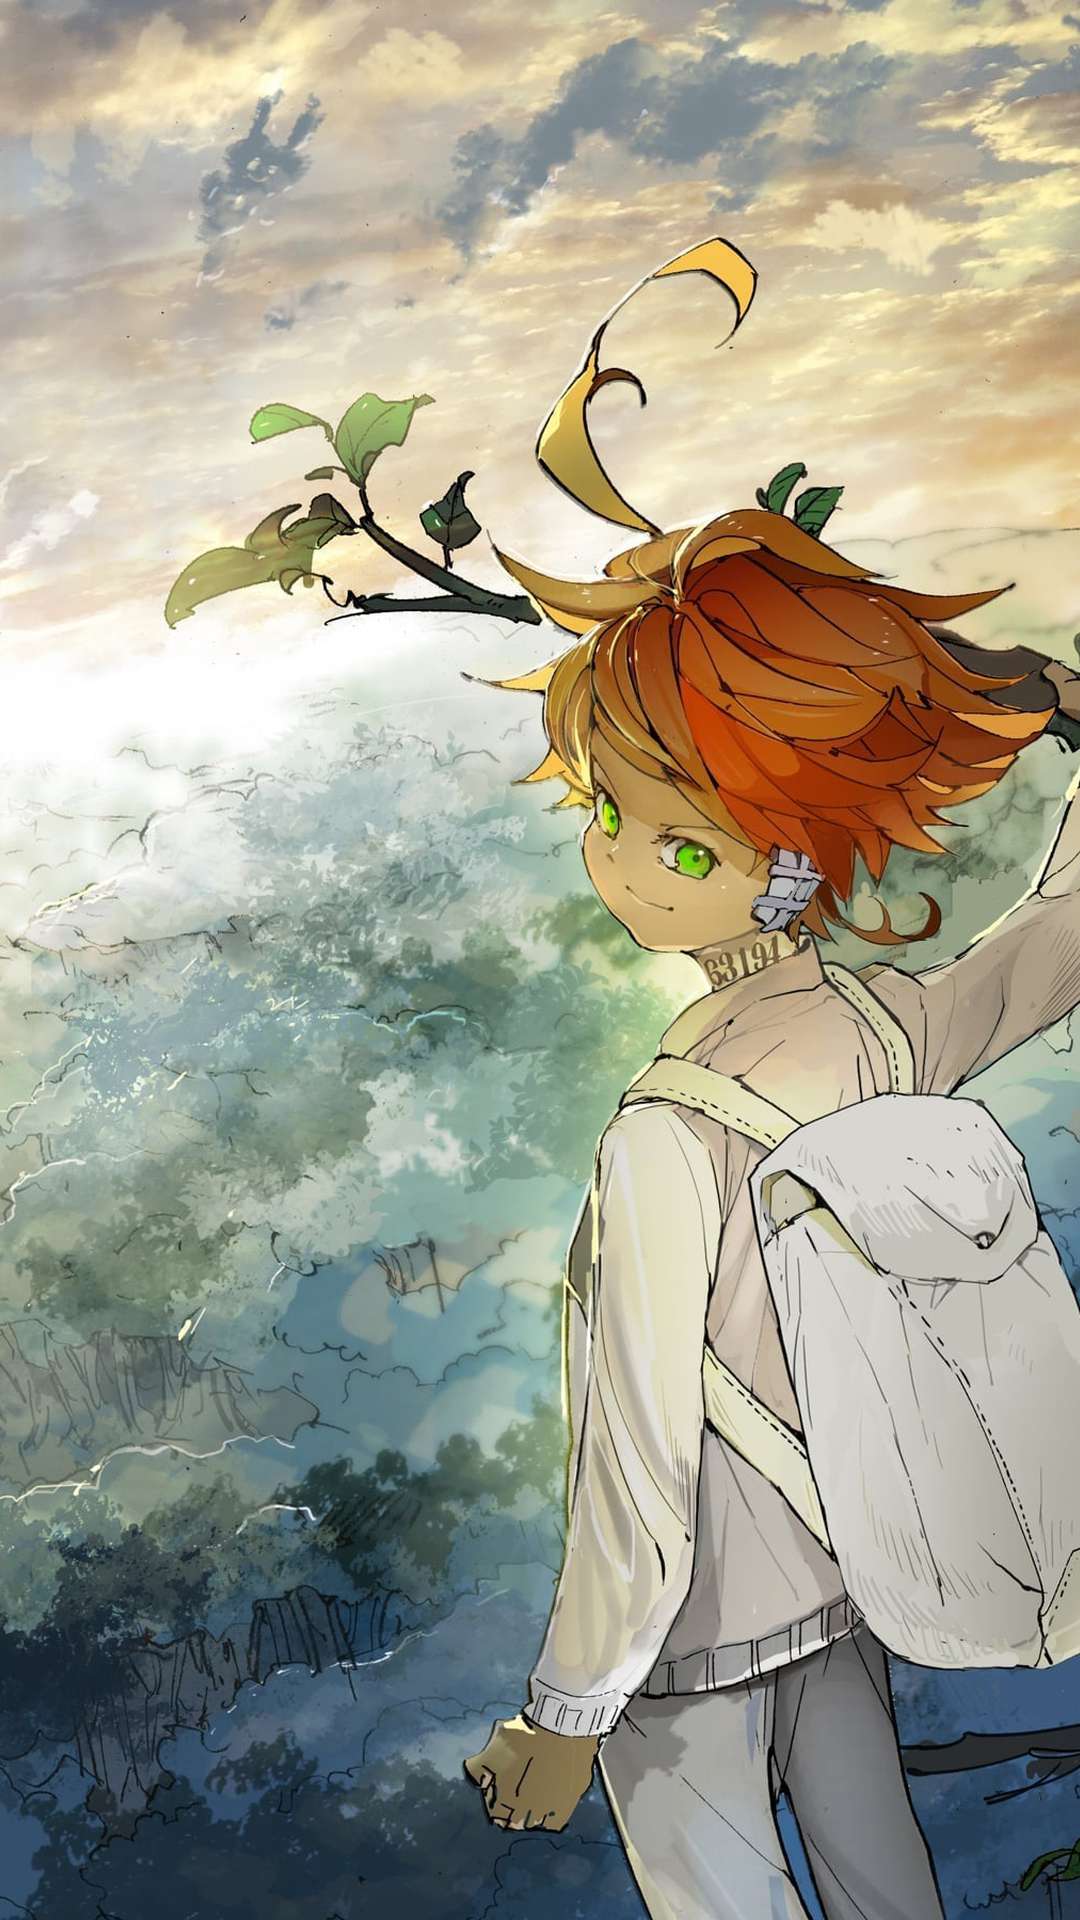 The Promised Neverland Background Images and Wallpapers – YL Computing